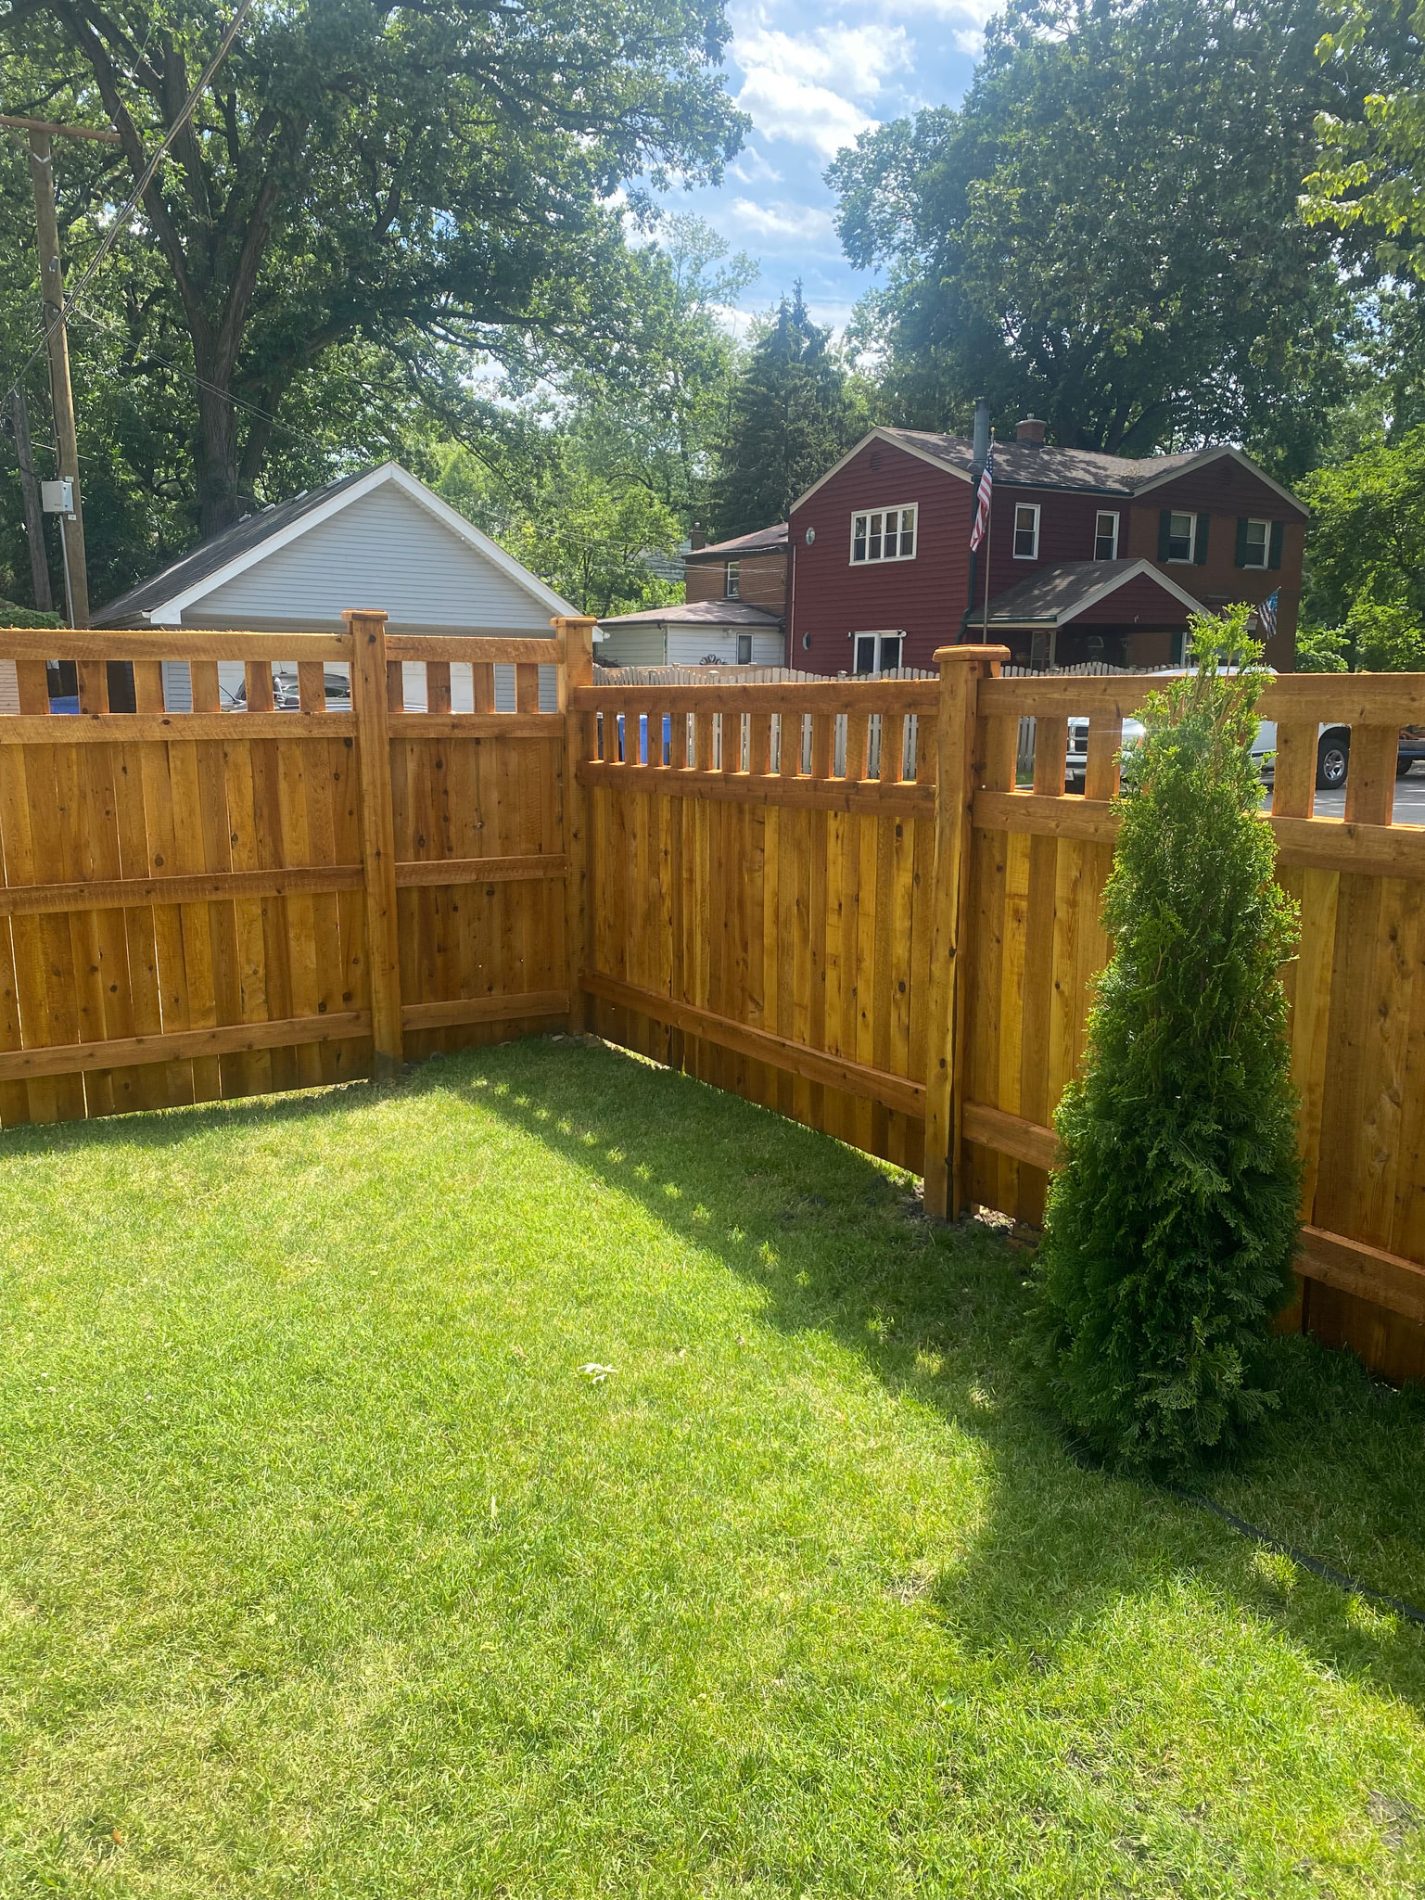 Privacy-Cedar-Fence-Images-5